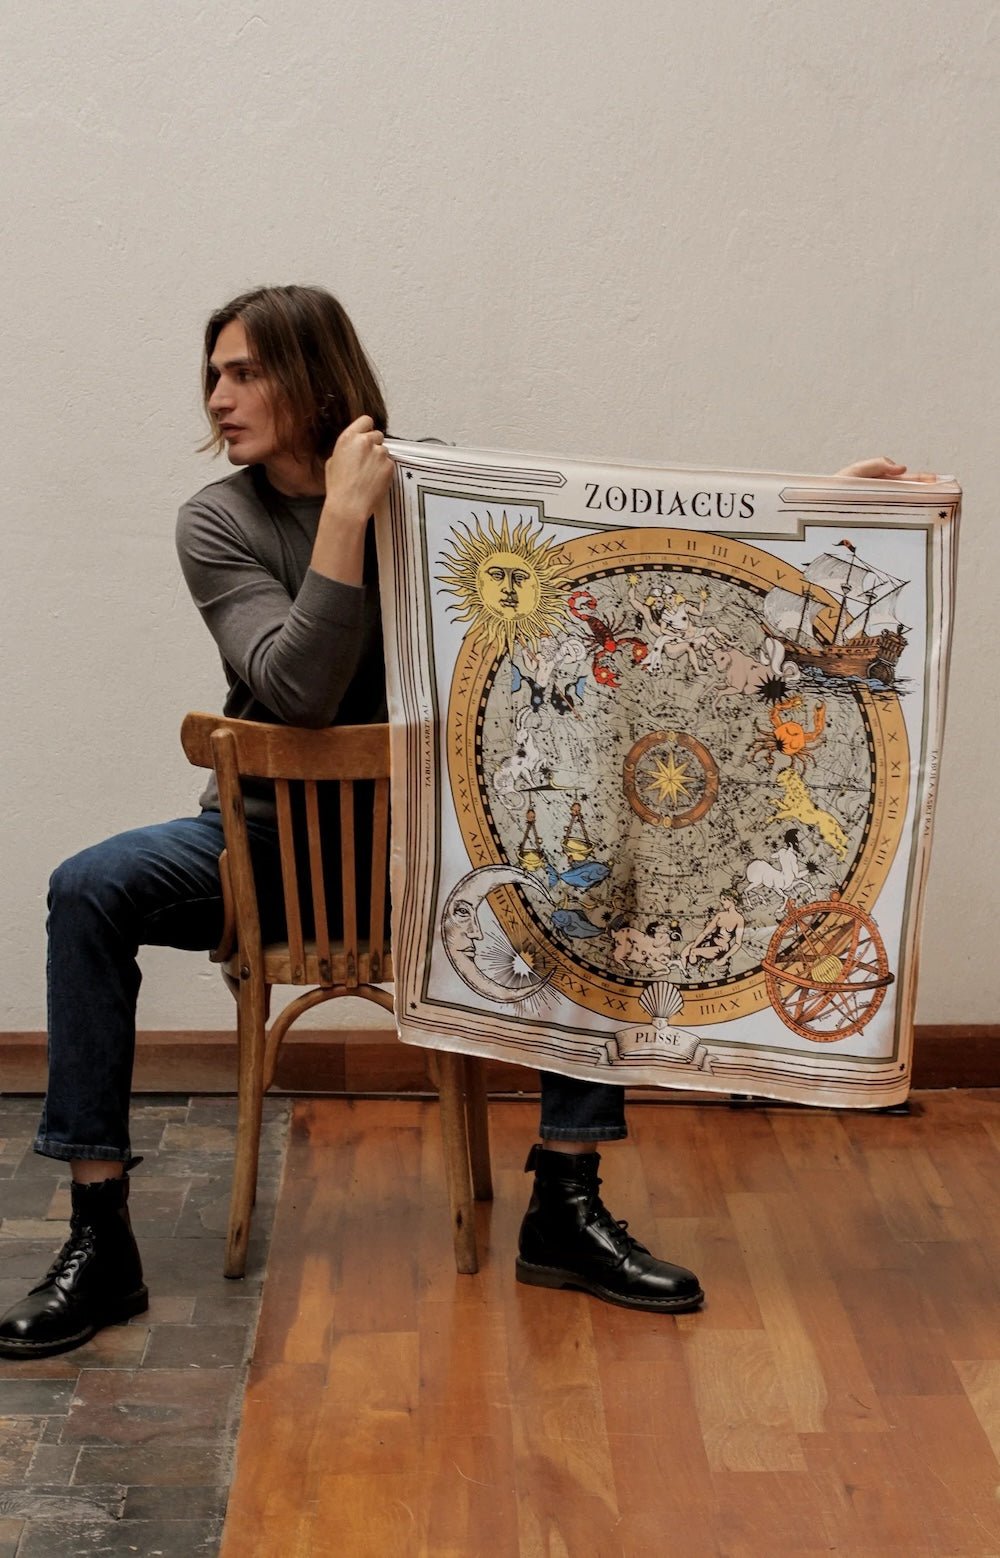 Man holding up brown zodiac scarf while sitting on chair backwards